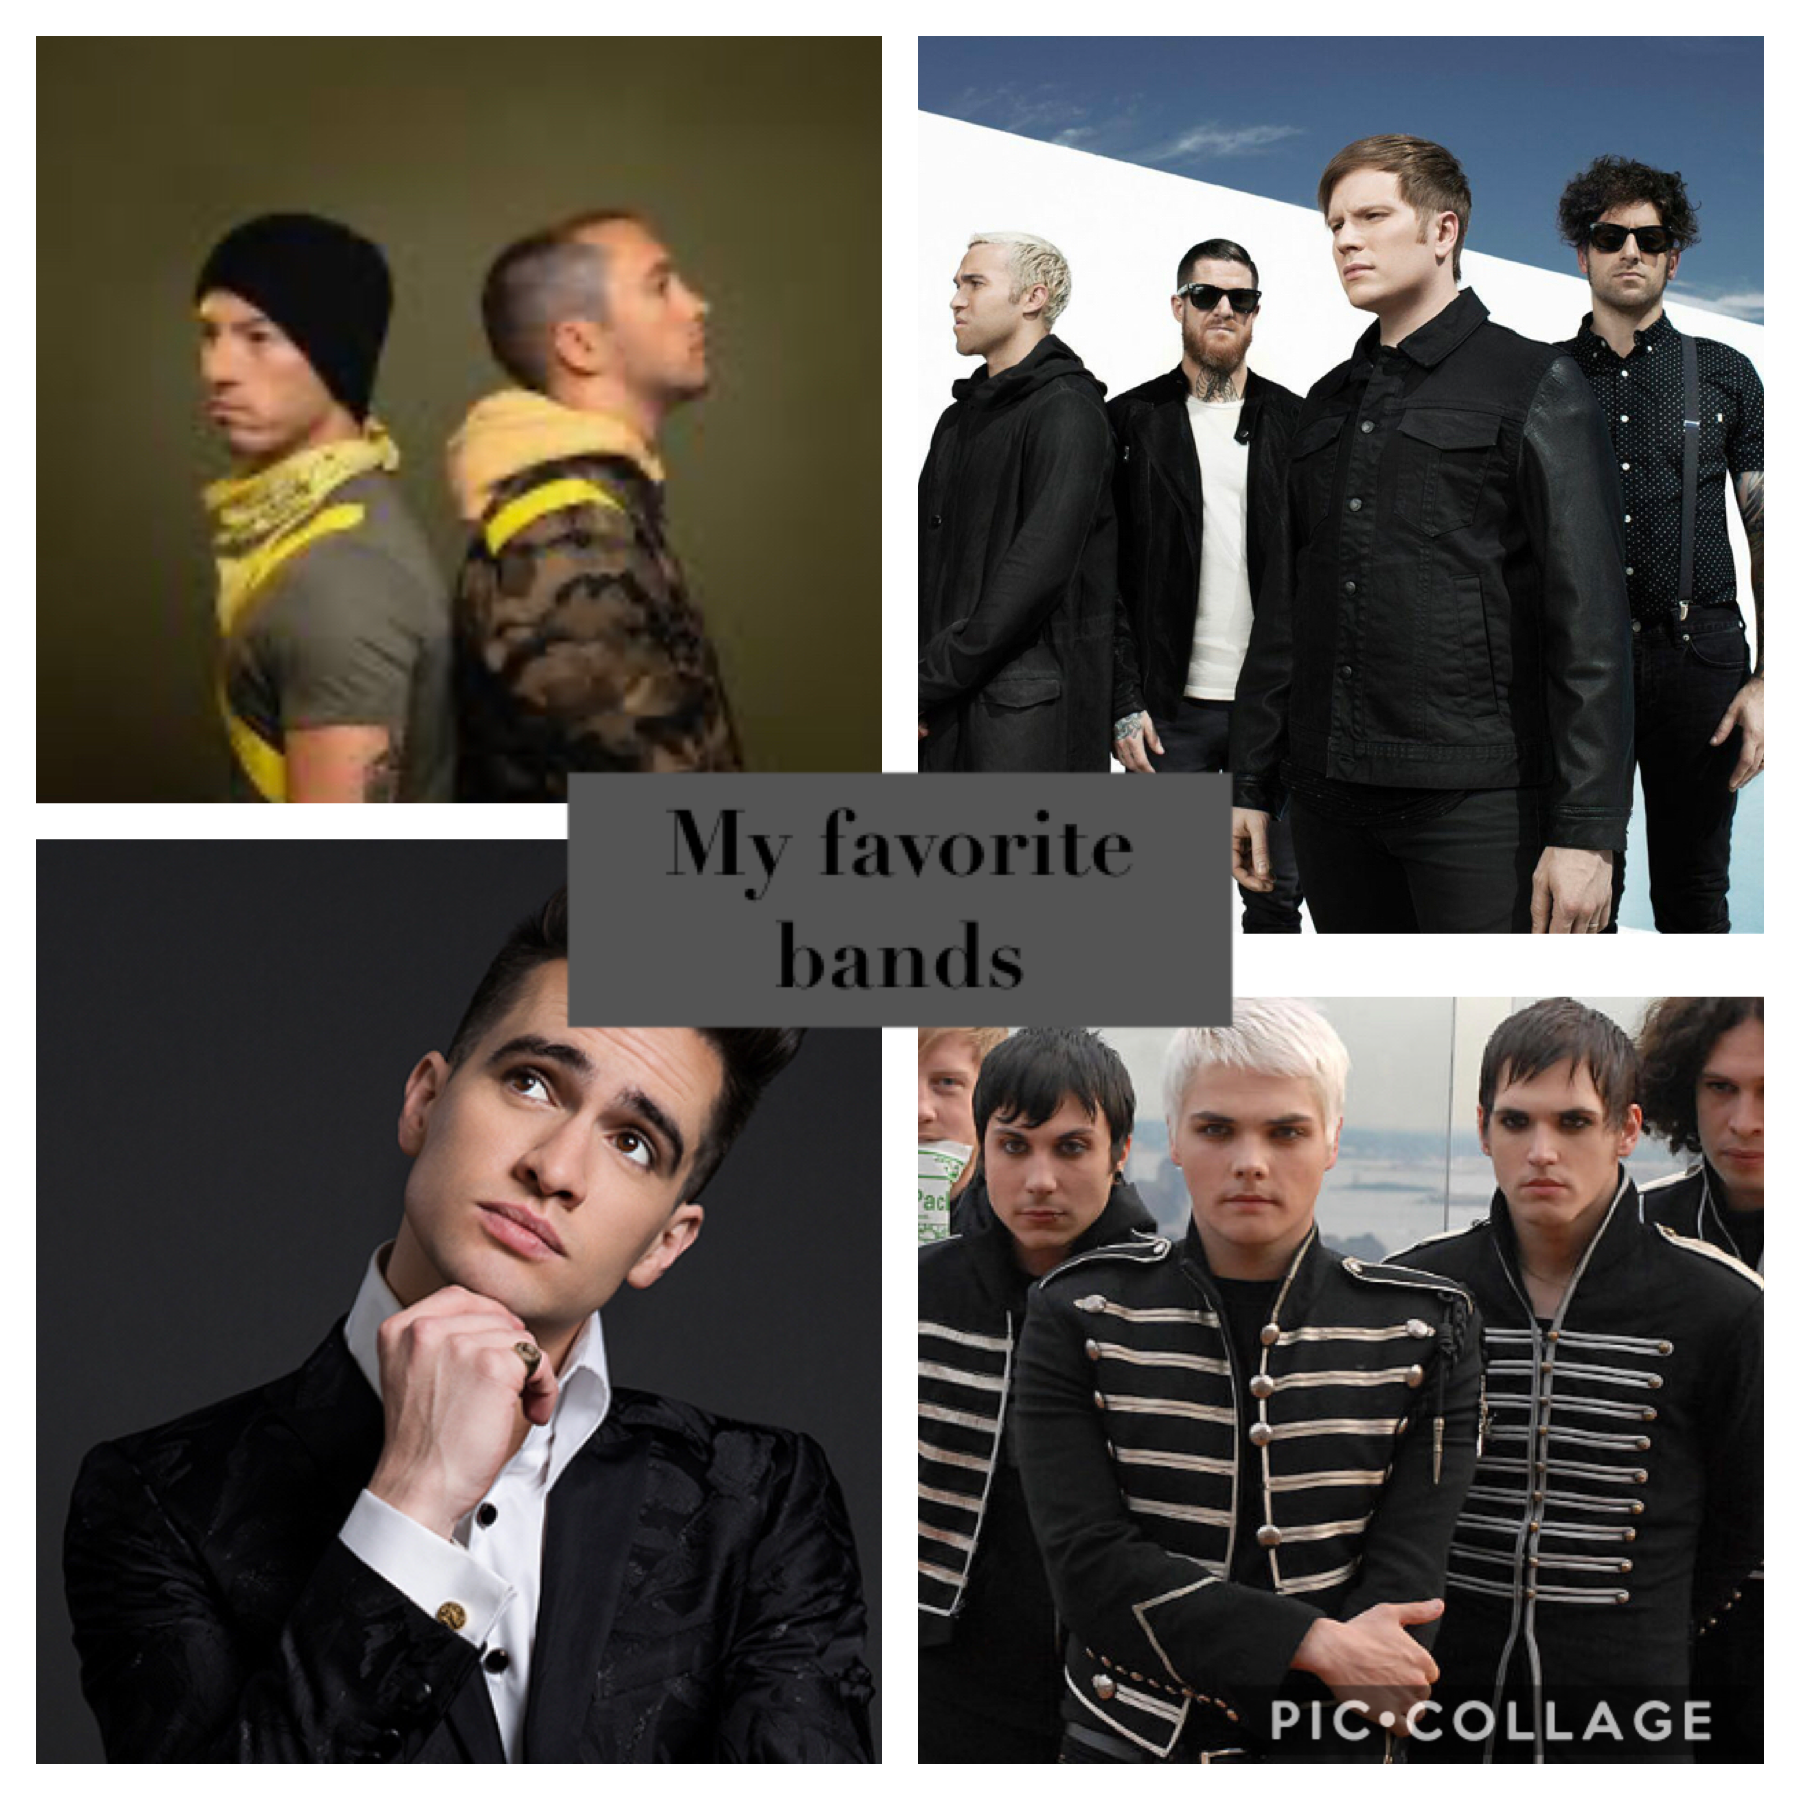 My favorite bands, the emo quartet fall out boy, my chemical romance, panic at the disco, twenty one pilots.